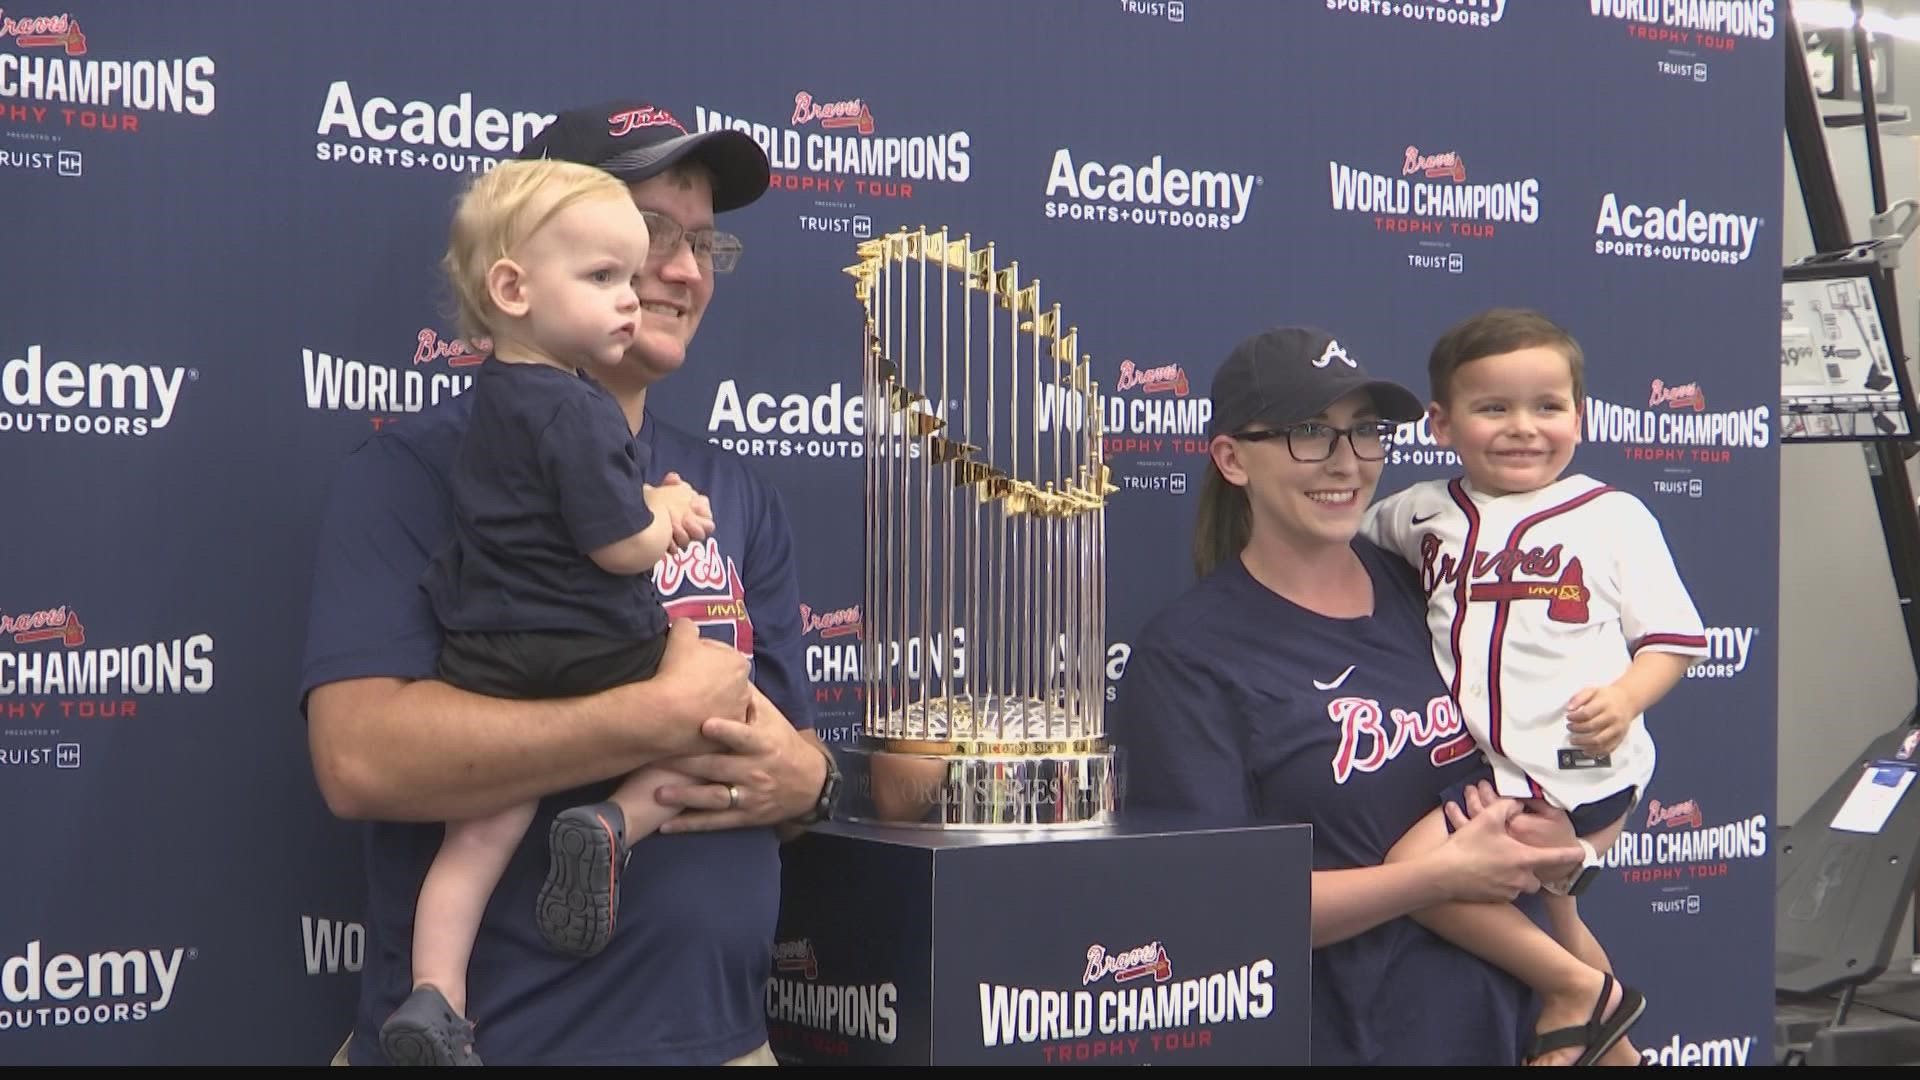 Following their historic World Series Championship season, the Atlanta Braves are allowing fans to see their World Series Trophy in various places like North Alabama